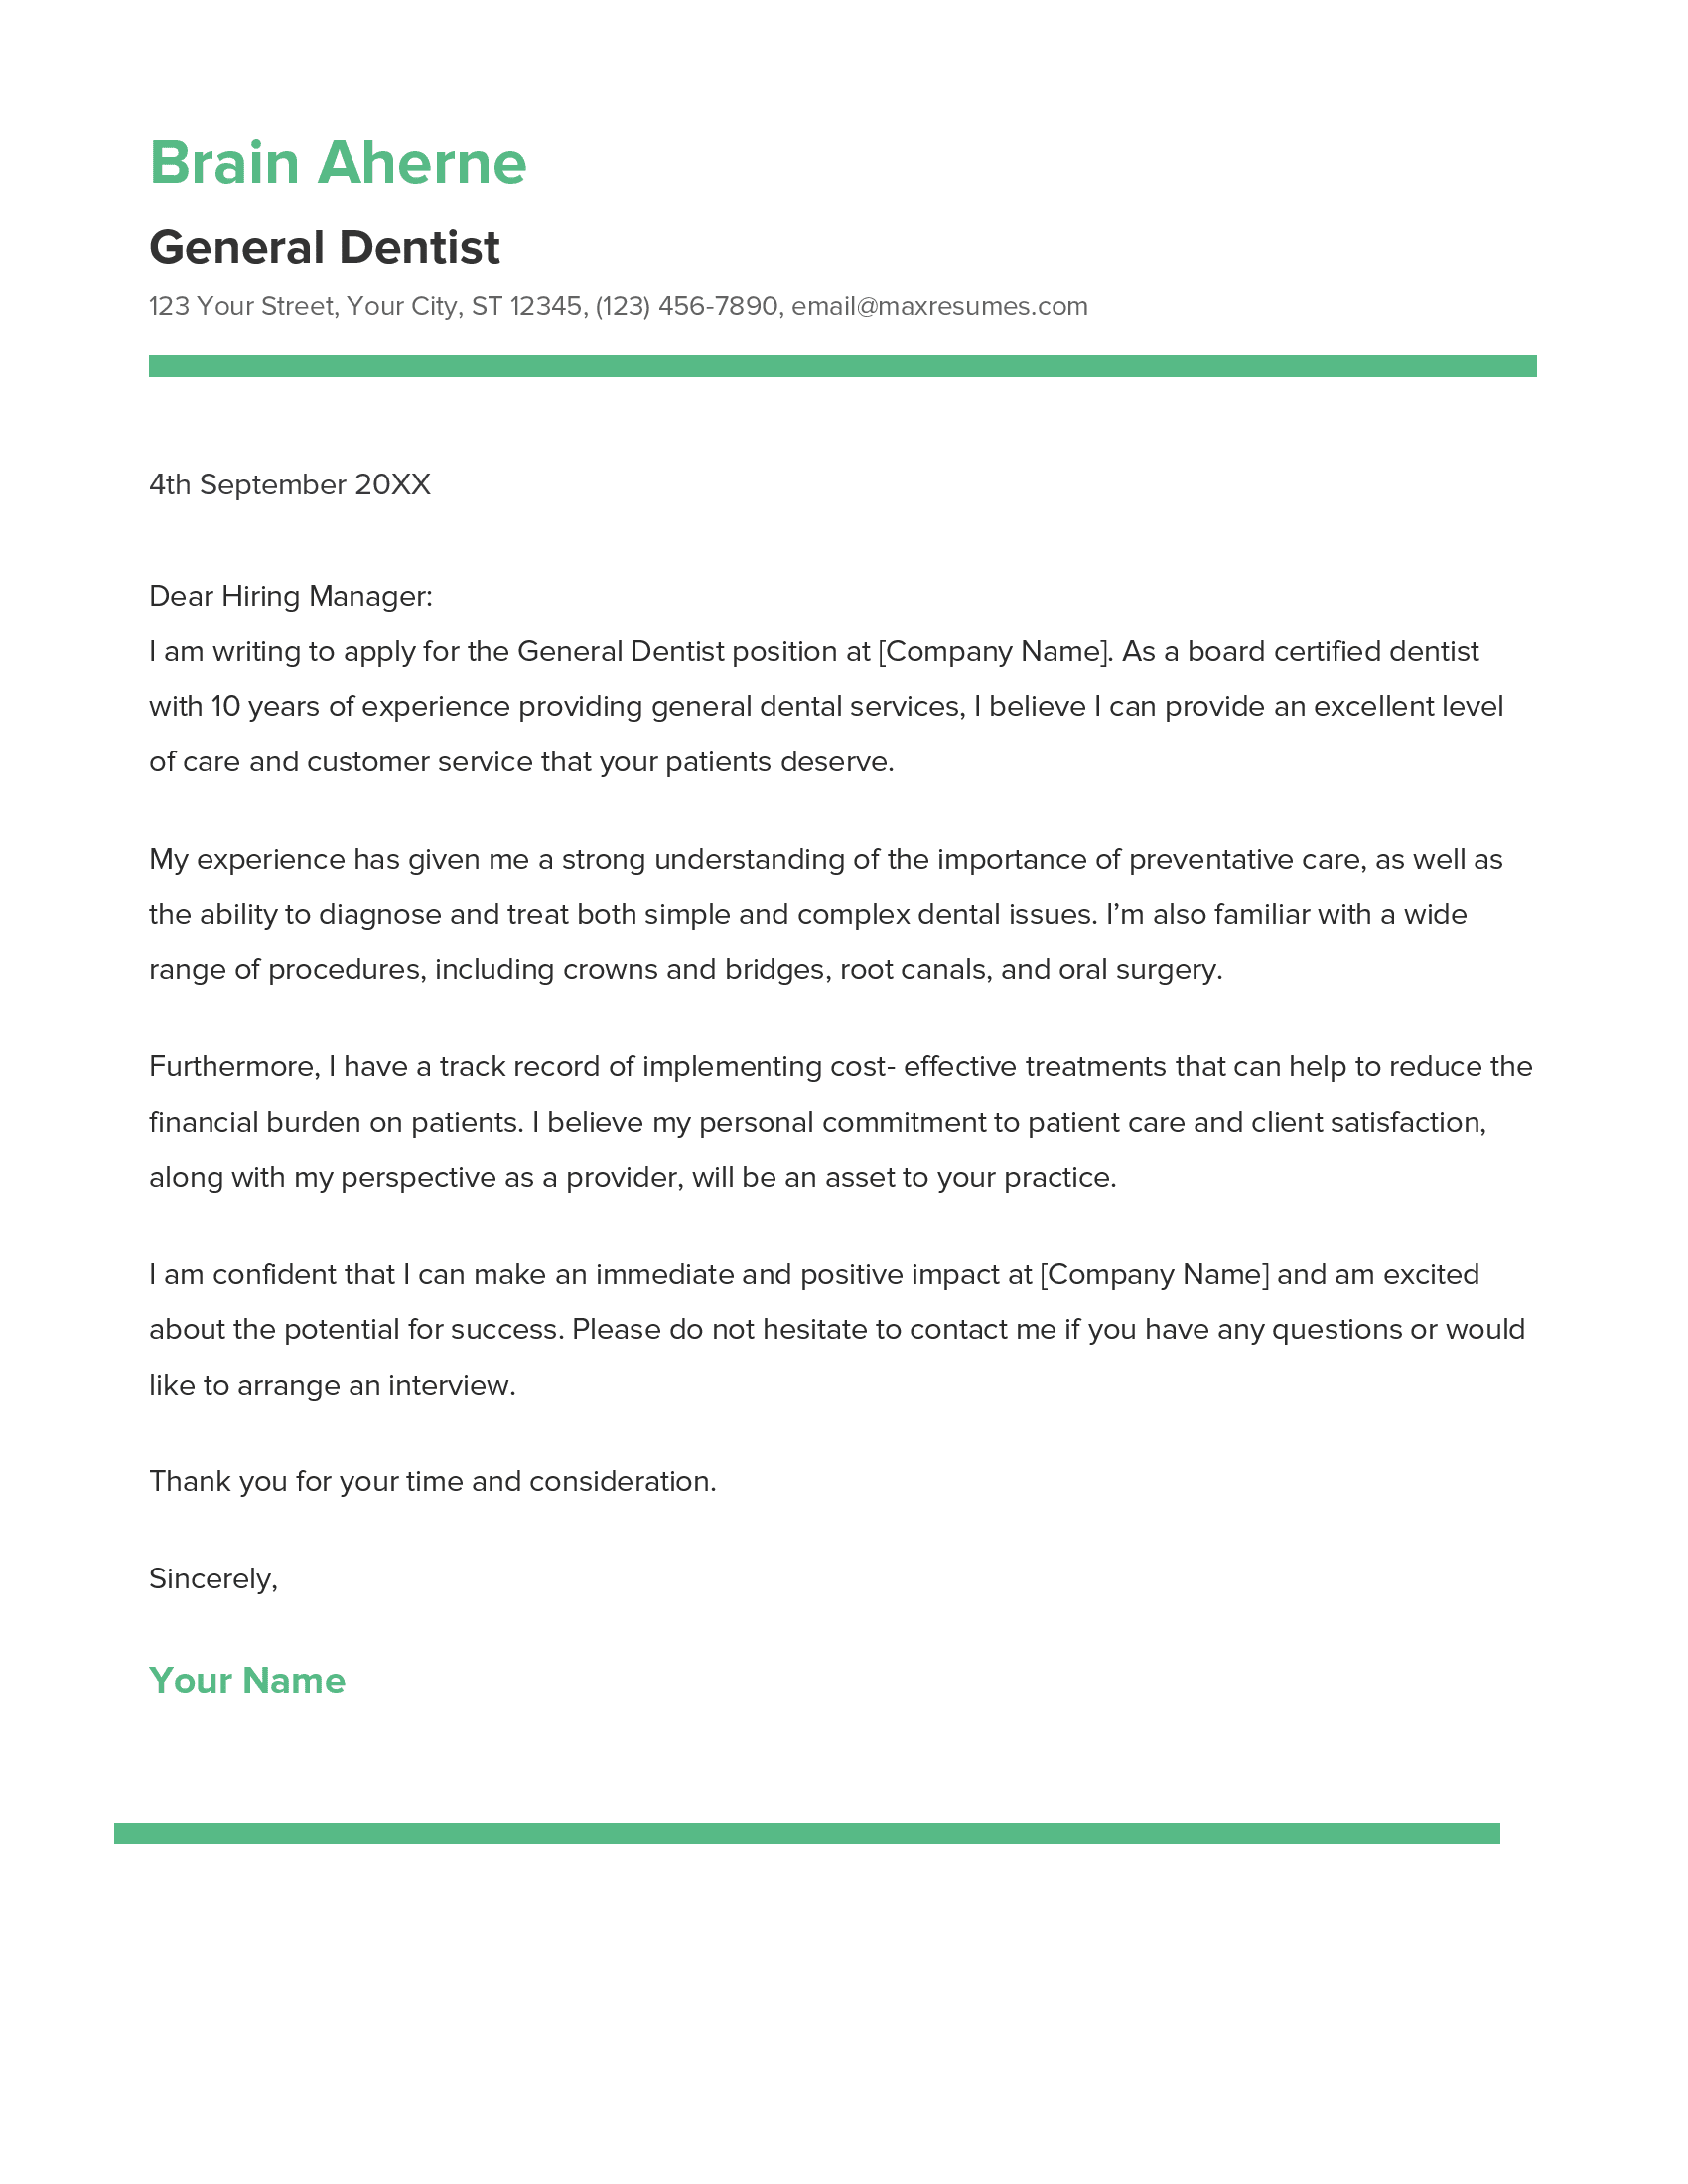 General Dentist Cover Letter Example